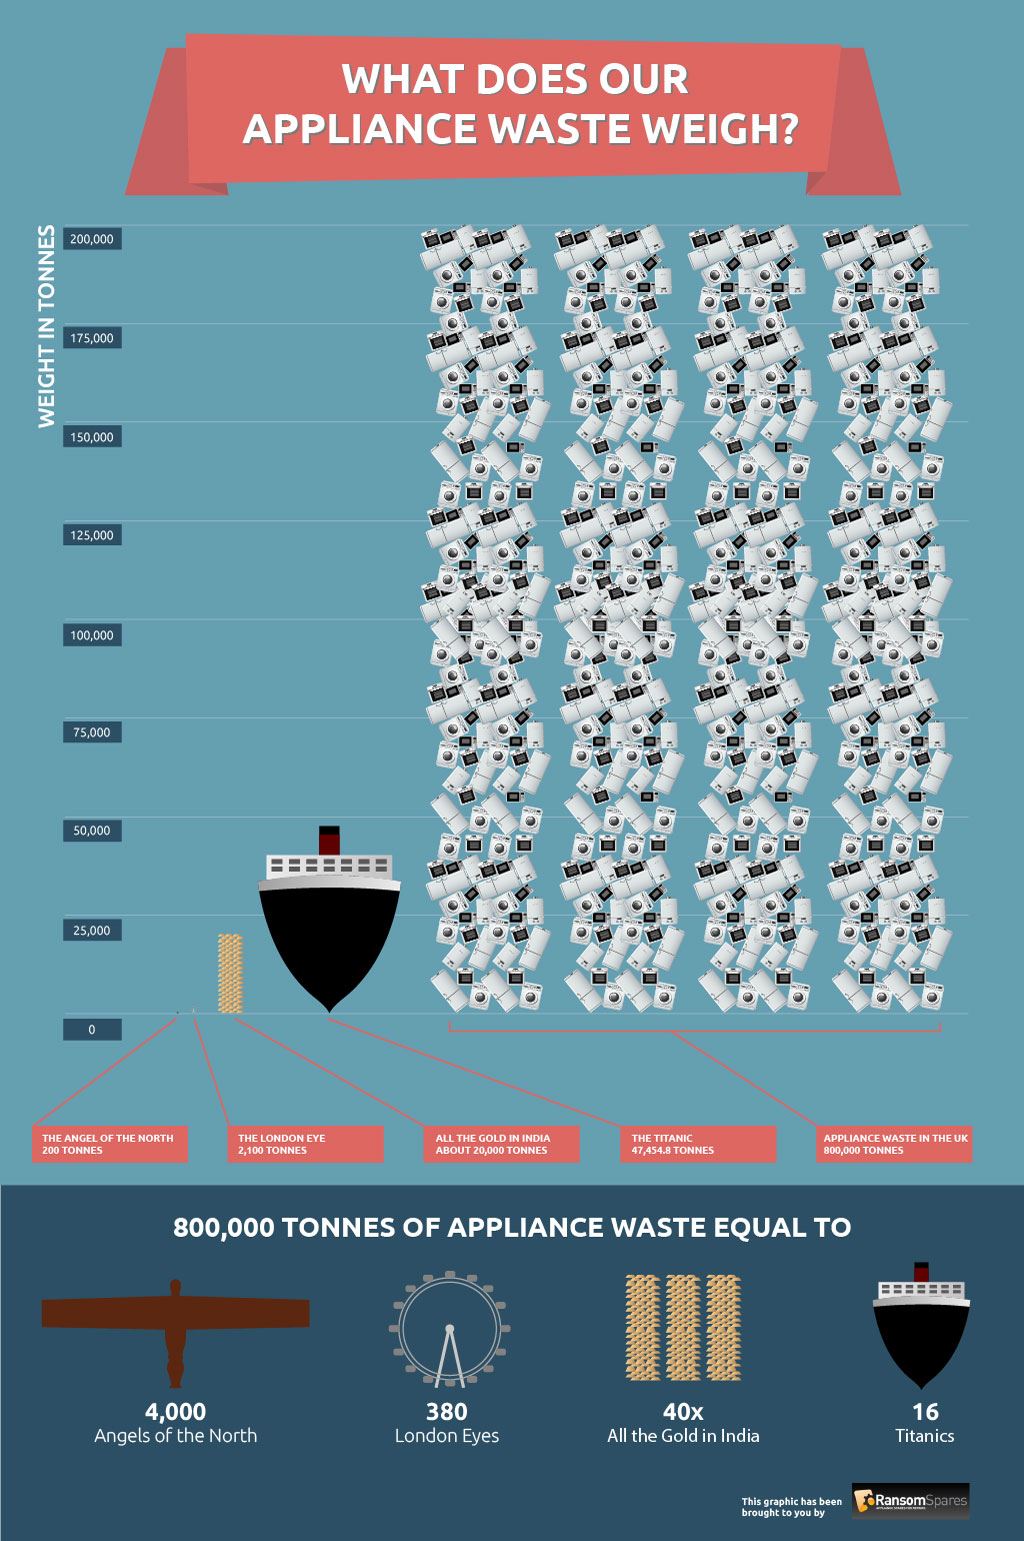 What Does Our Appliance Waste Weigh?